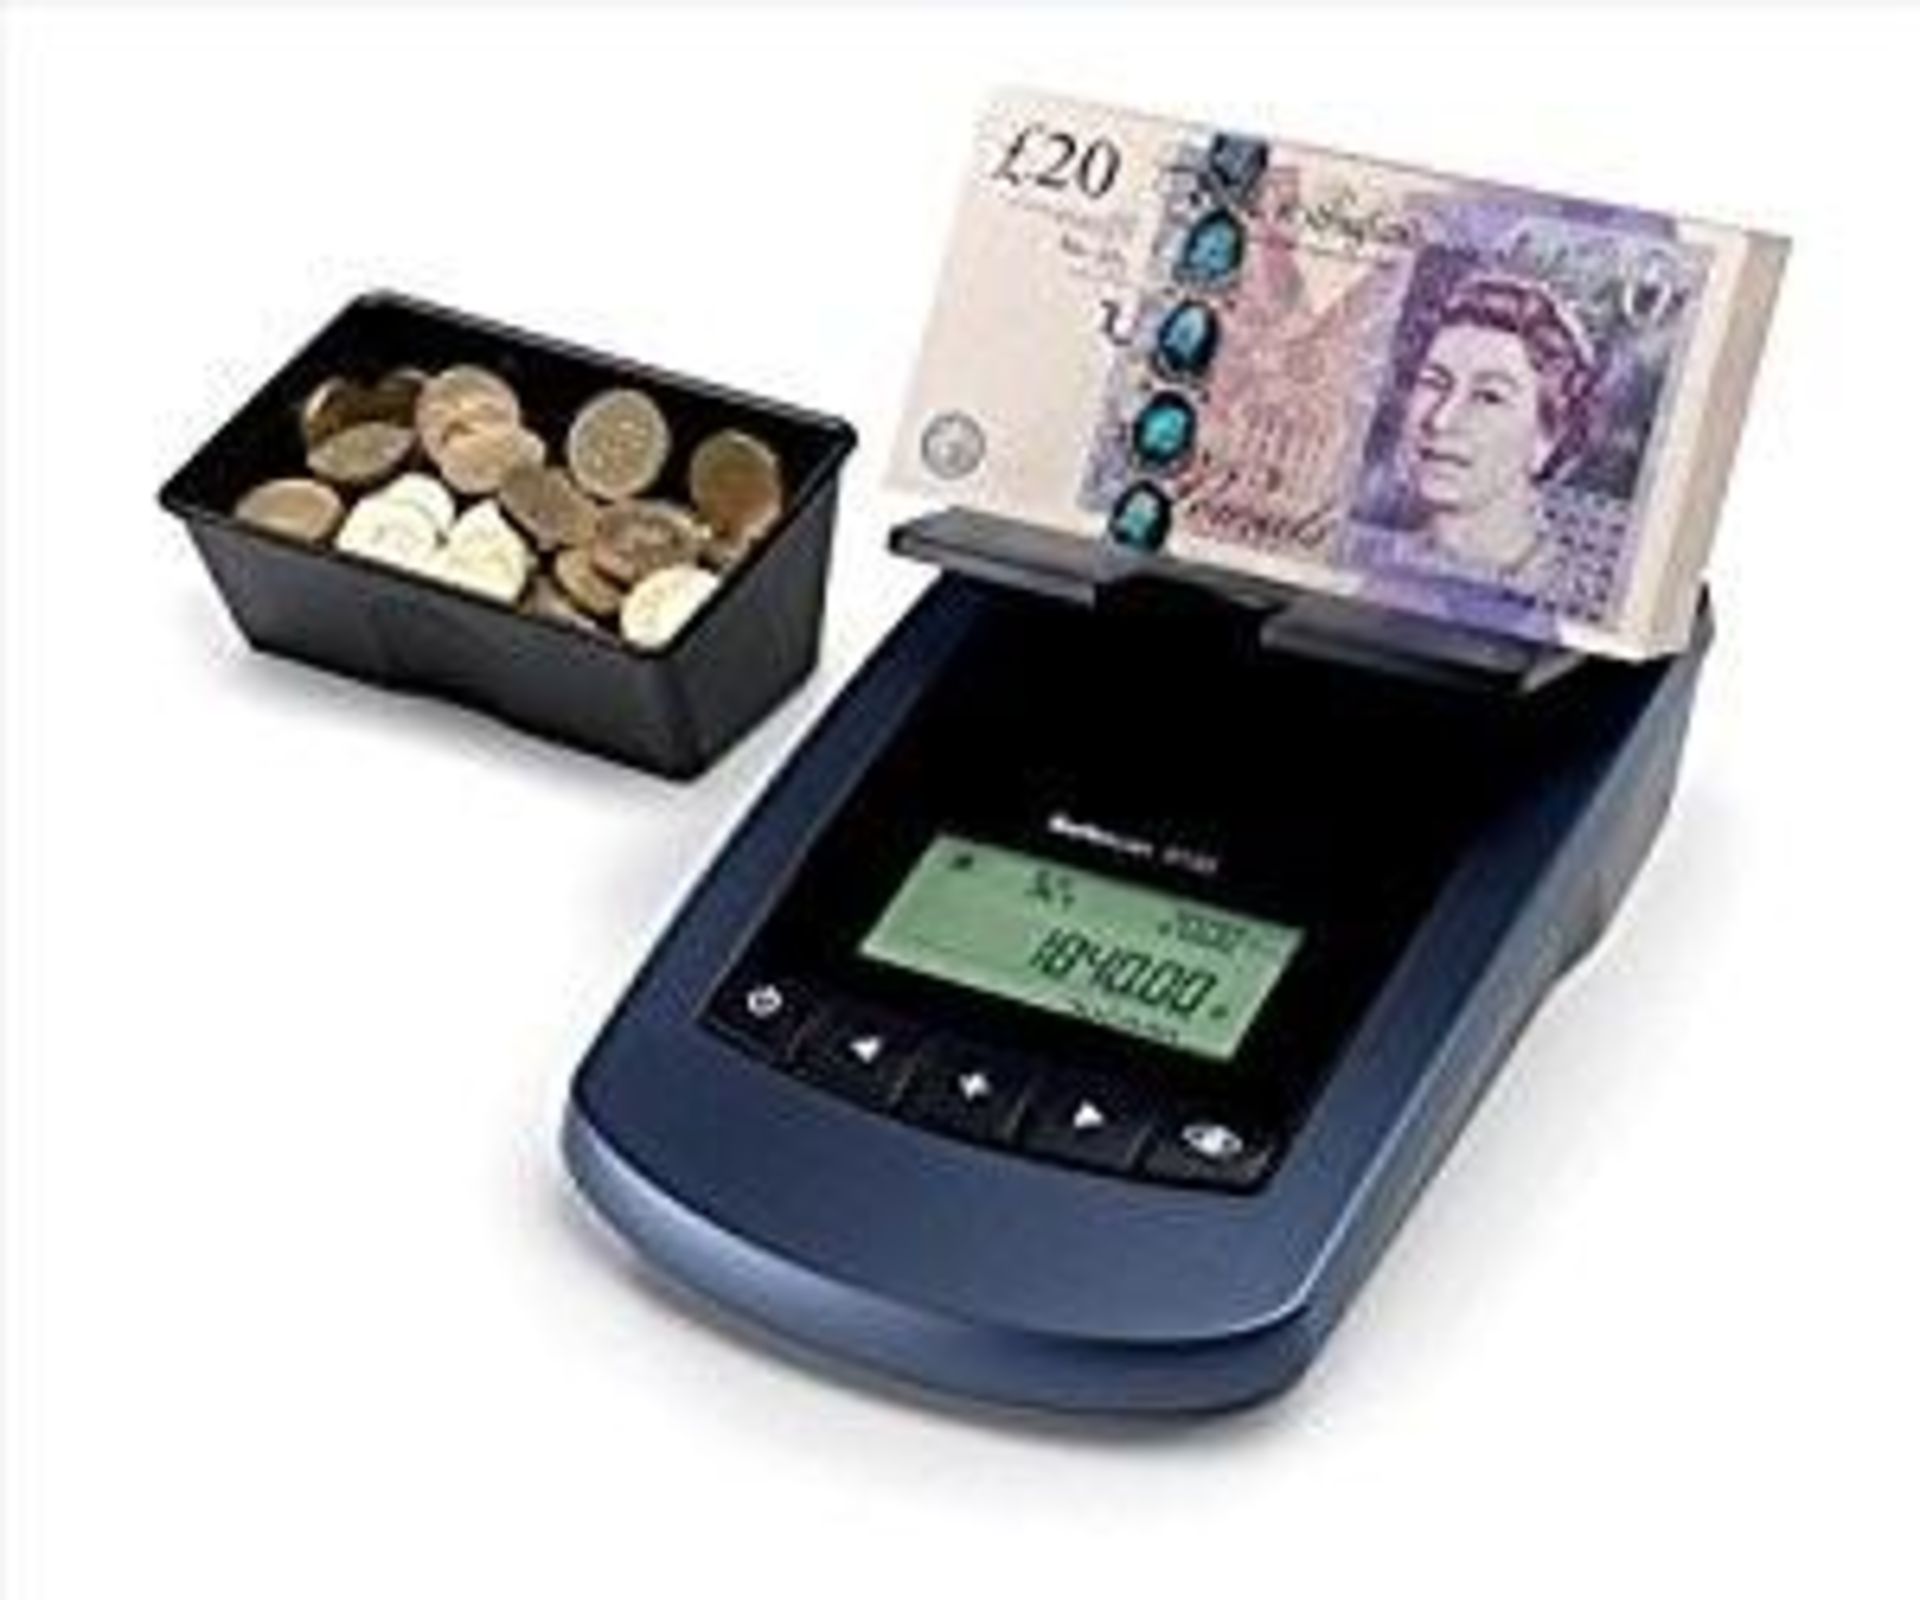 1 x SafeScan 6155 Coin and Bank Note Counter - Includes Coin and Note Trays, Box, Instructions and B